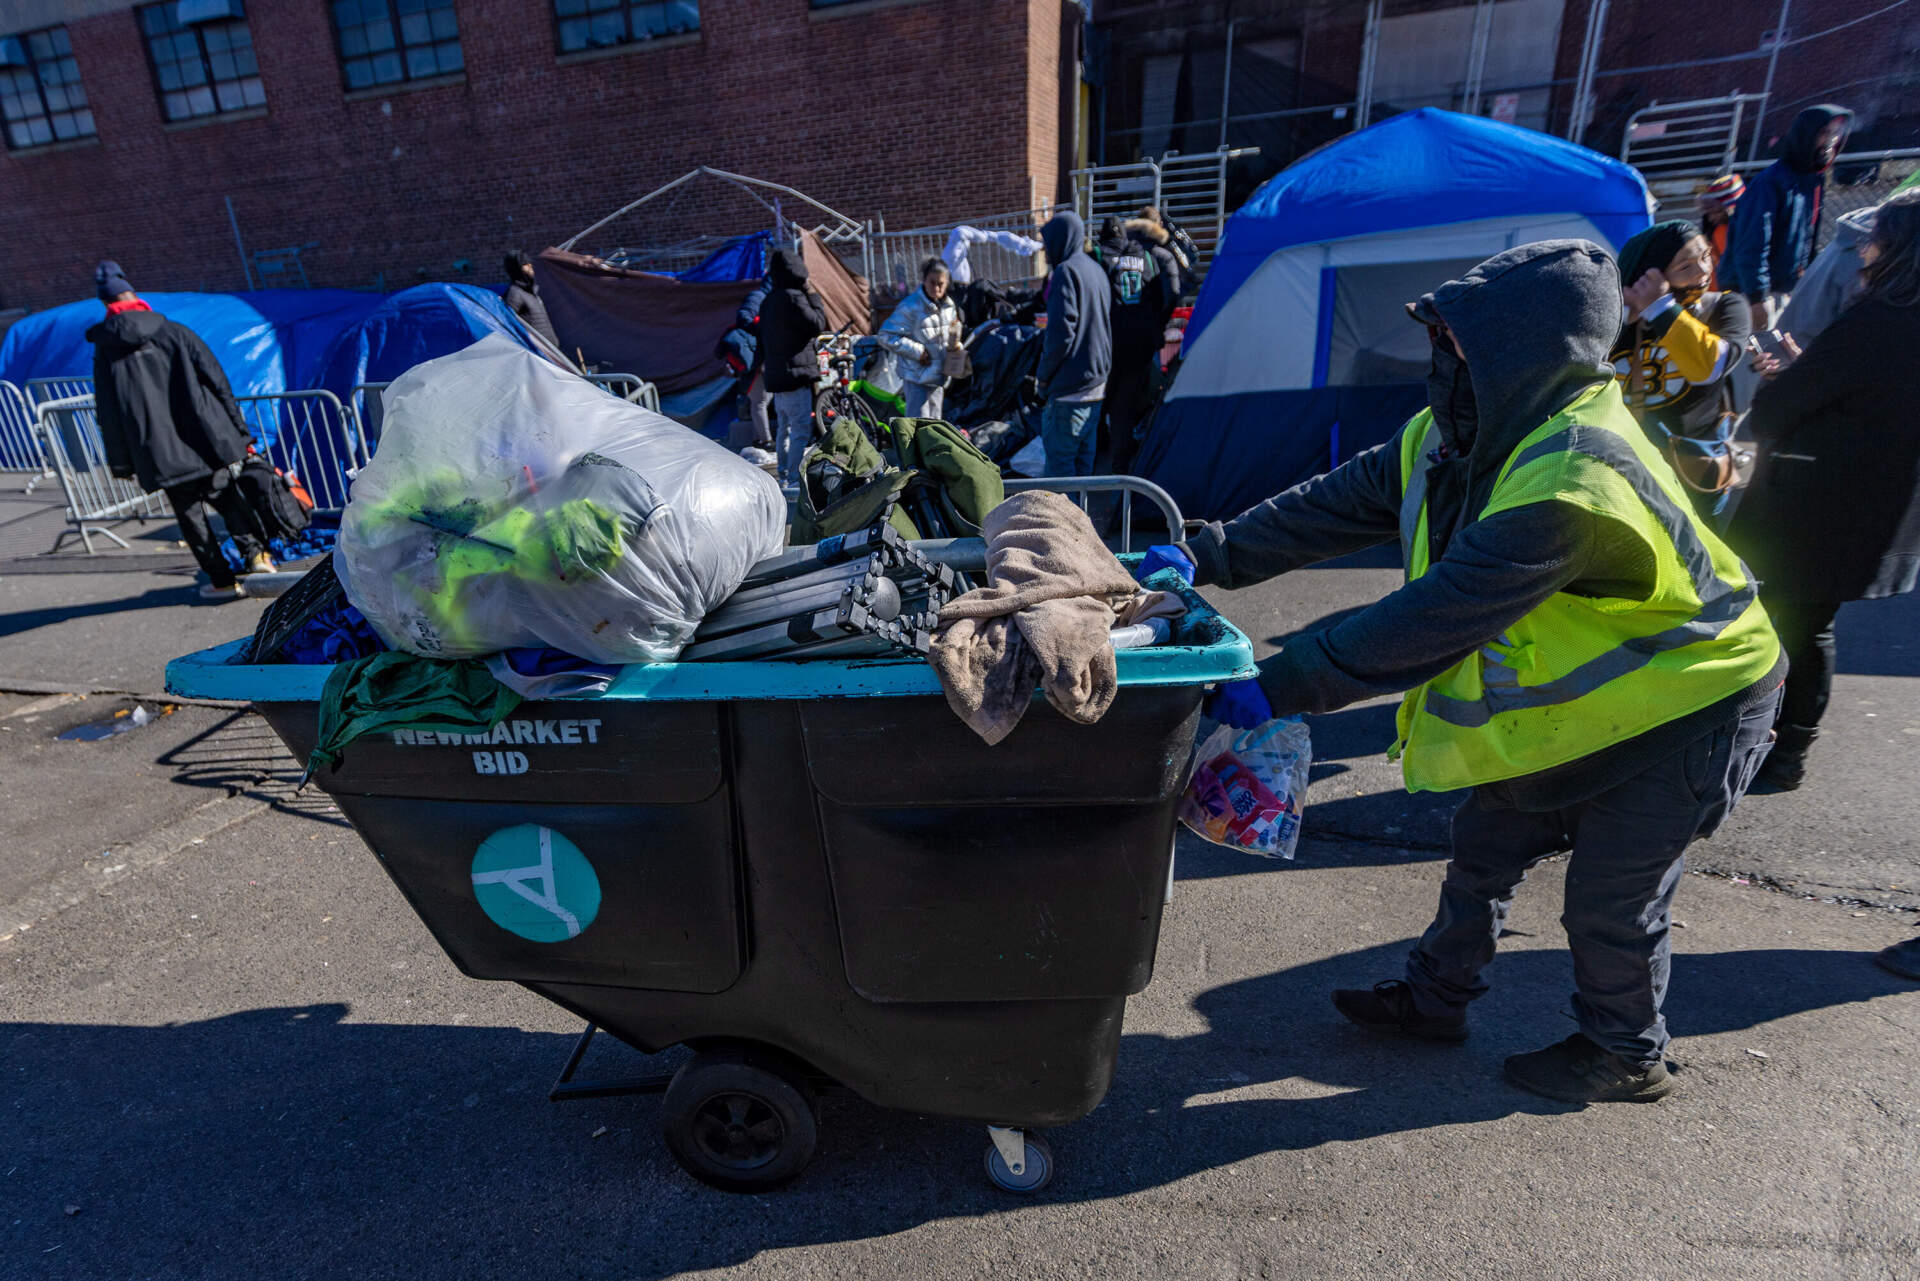 A volunteer with the Newmarket Business Improvement District wheels a cart full of the belongings of someone who lived in a tent on Atkinson Street. The itms will be sent to the shelter where that person will be staying. (Jesse Costa/WBUR)